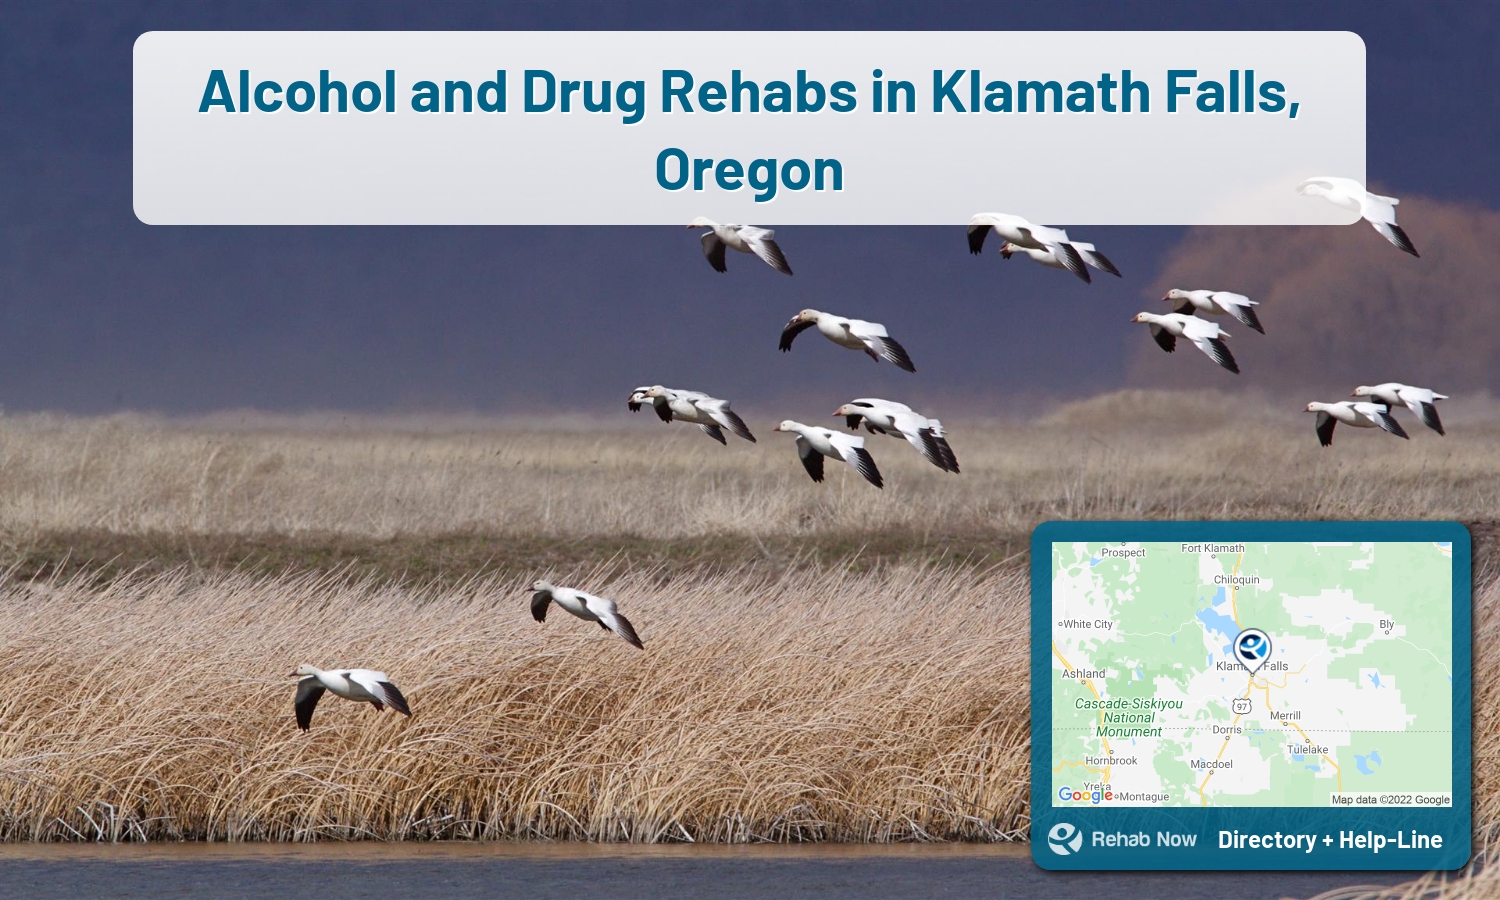 Klamath Falls, OR Treatment Centers. Find drug rehab in Klamath Falls, Oregon, or detox and treatment programs. Get the right help now!